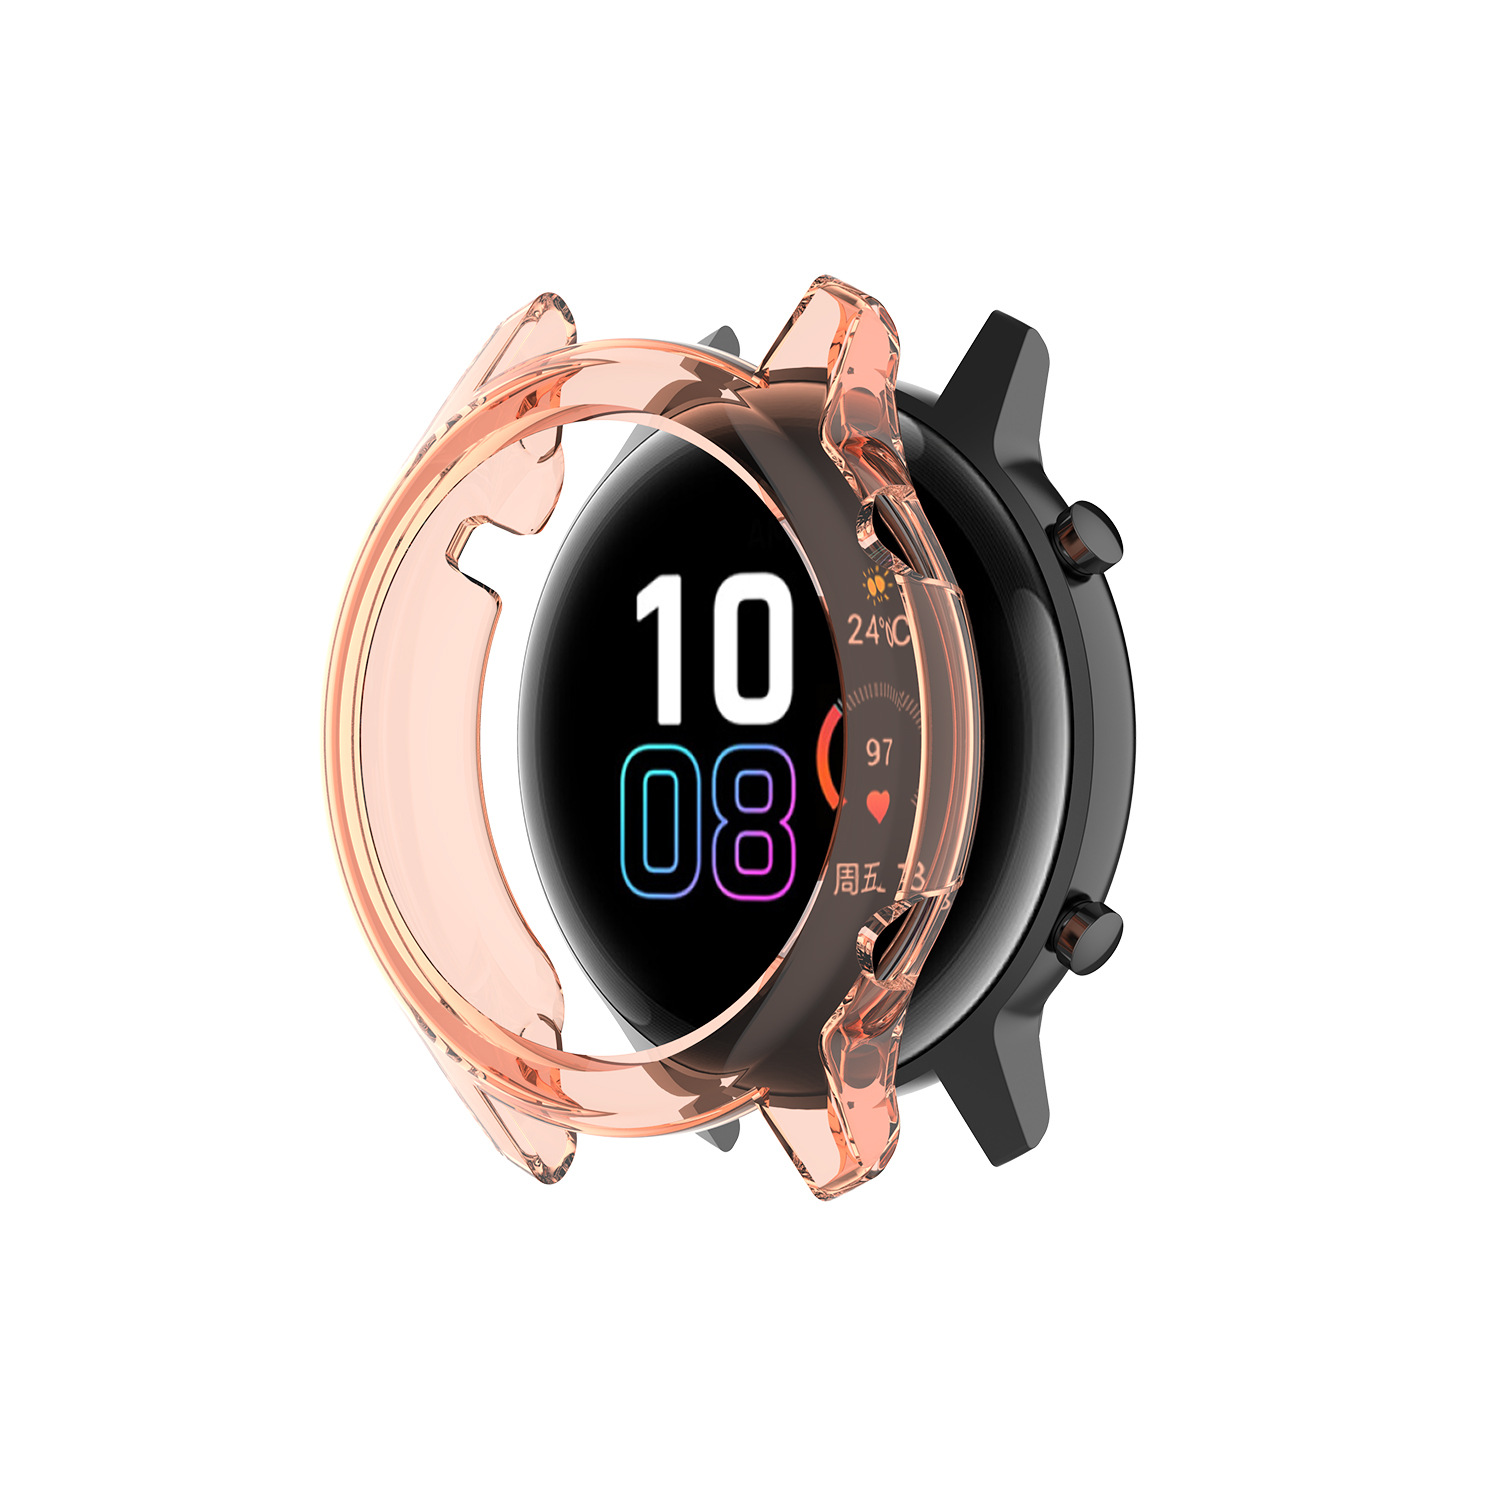 Find Bakeey TPU Half Cover Transparent Protector Case for Huawei Honor Magic Watch2 42mm/46mm for Sale on Gipsybee.com with cryptocurrencies